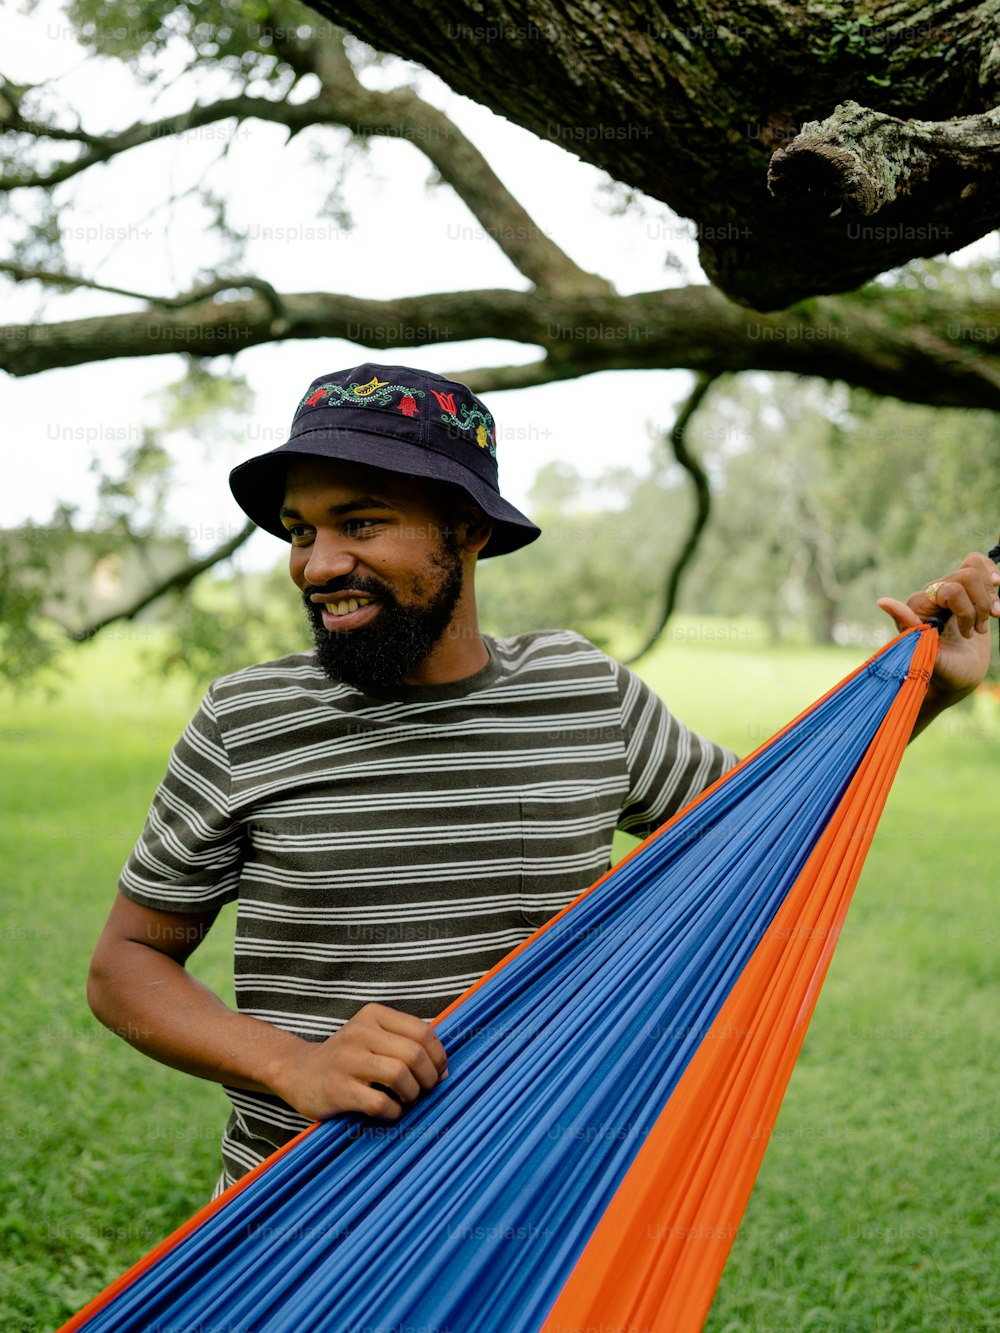 a man holding a blue and orange hammock under a tree